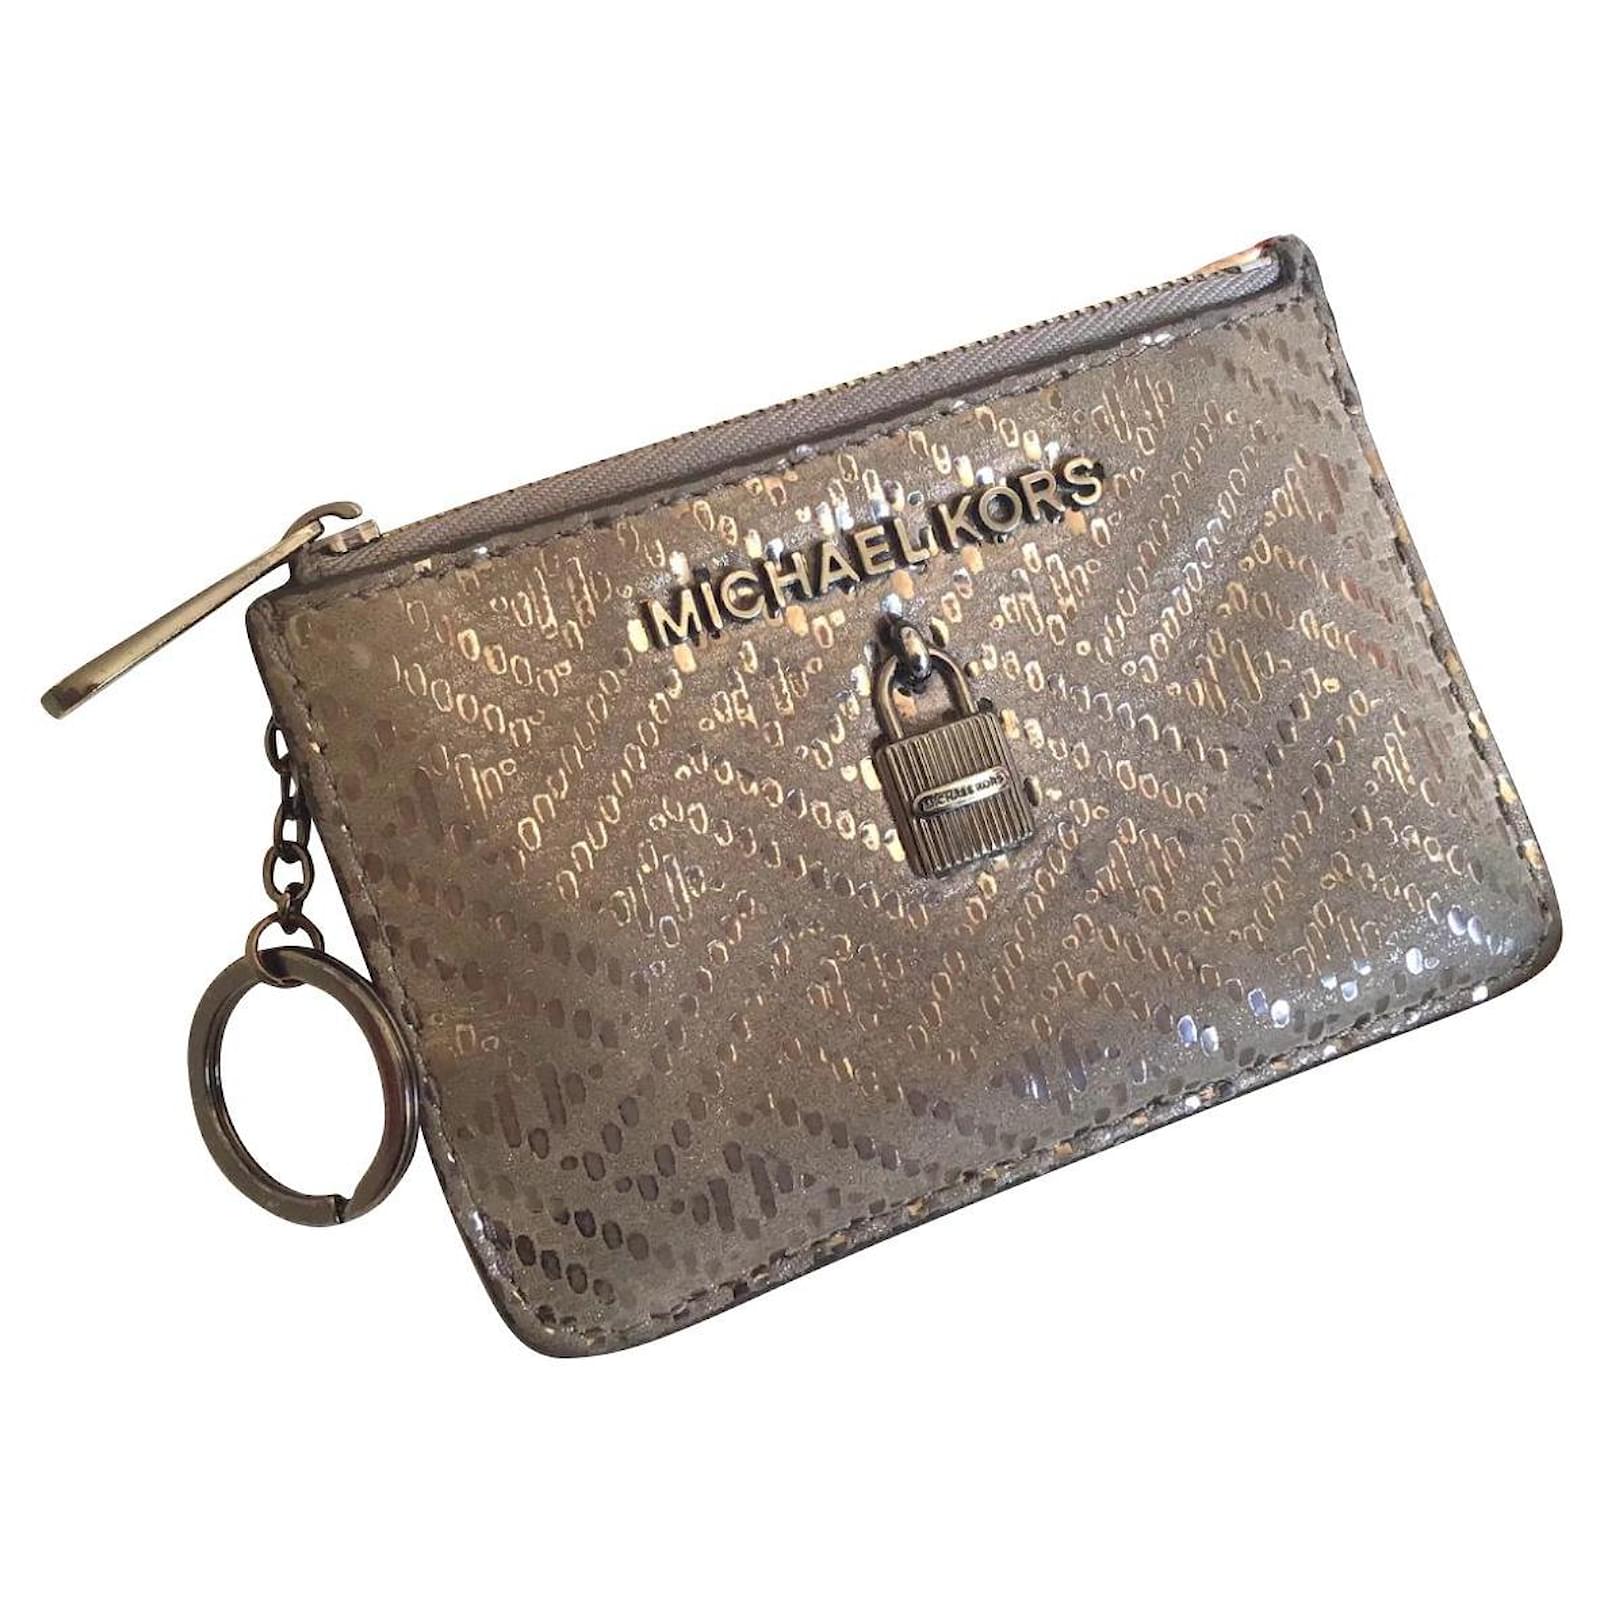 Large Micheal kors purse with chain hanger selma | Michael kors bag, Purses,  Micheal kors